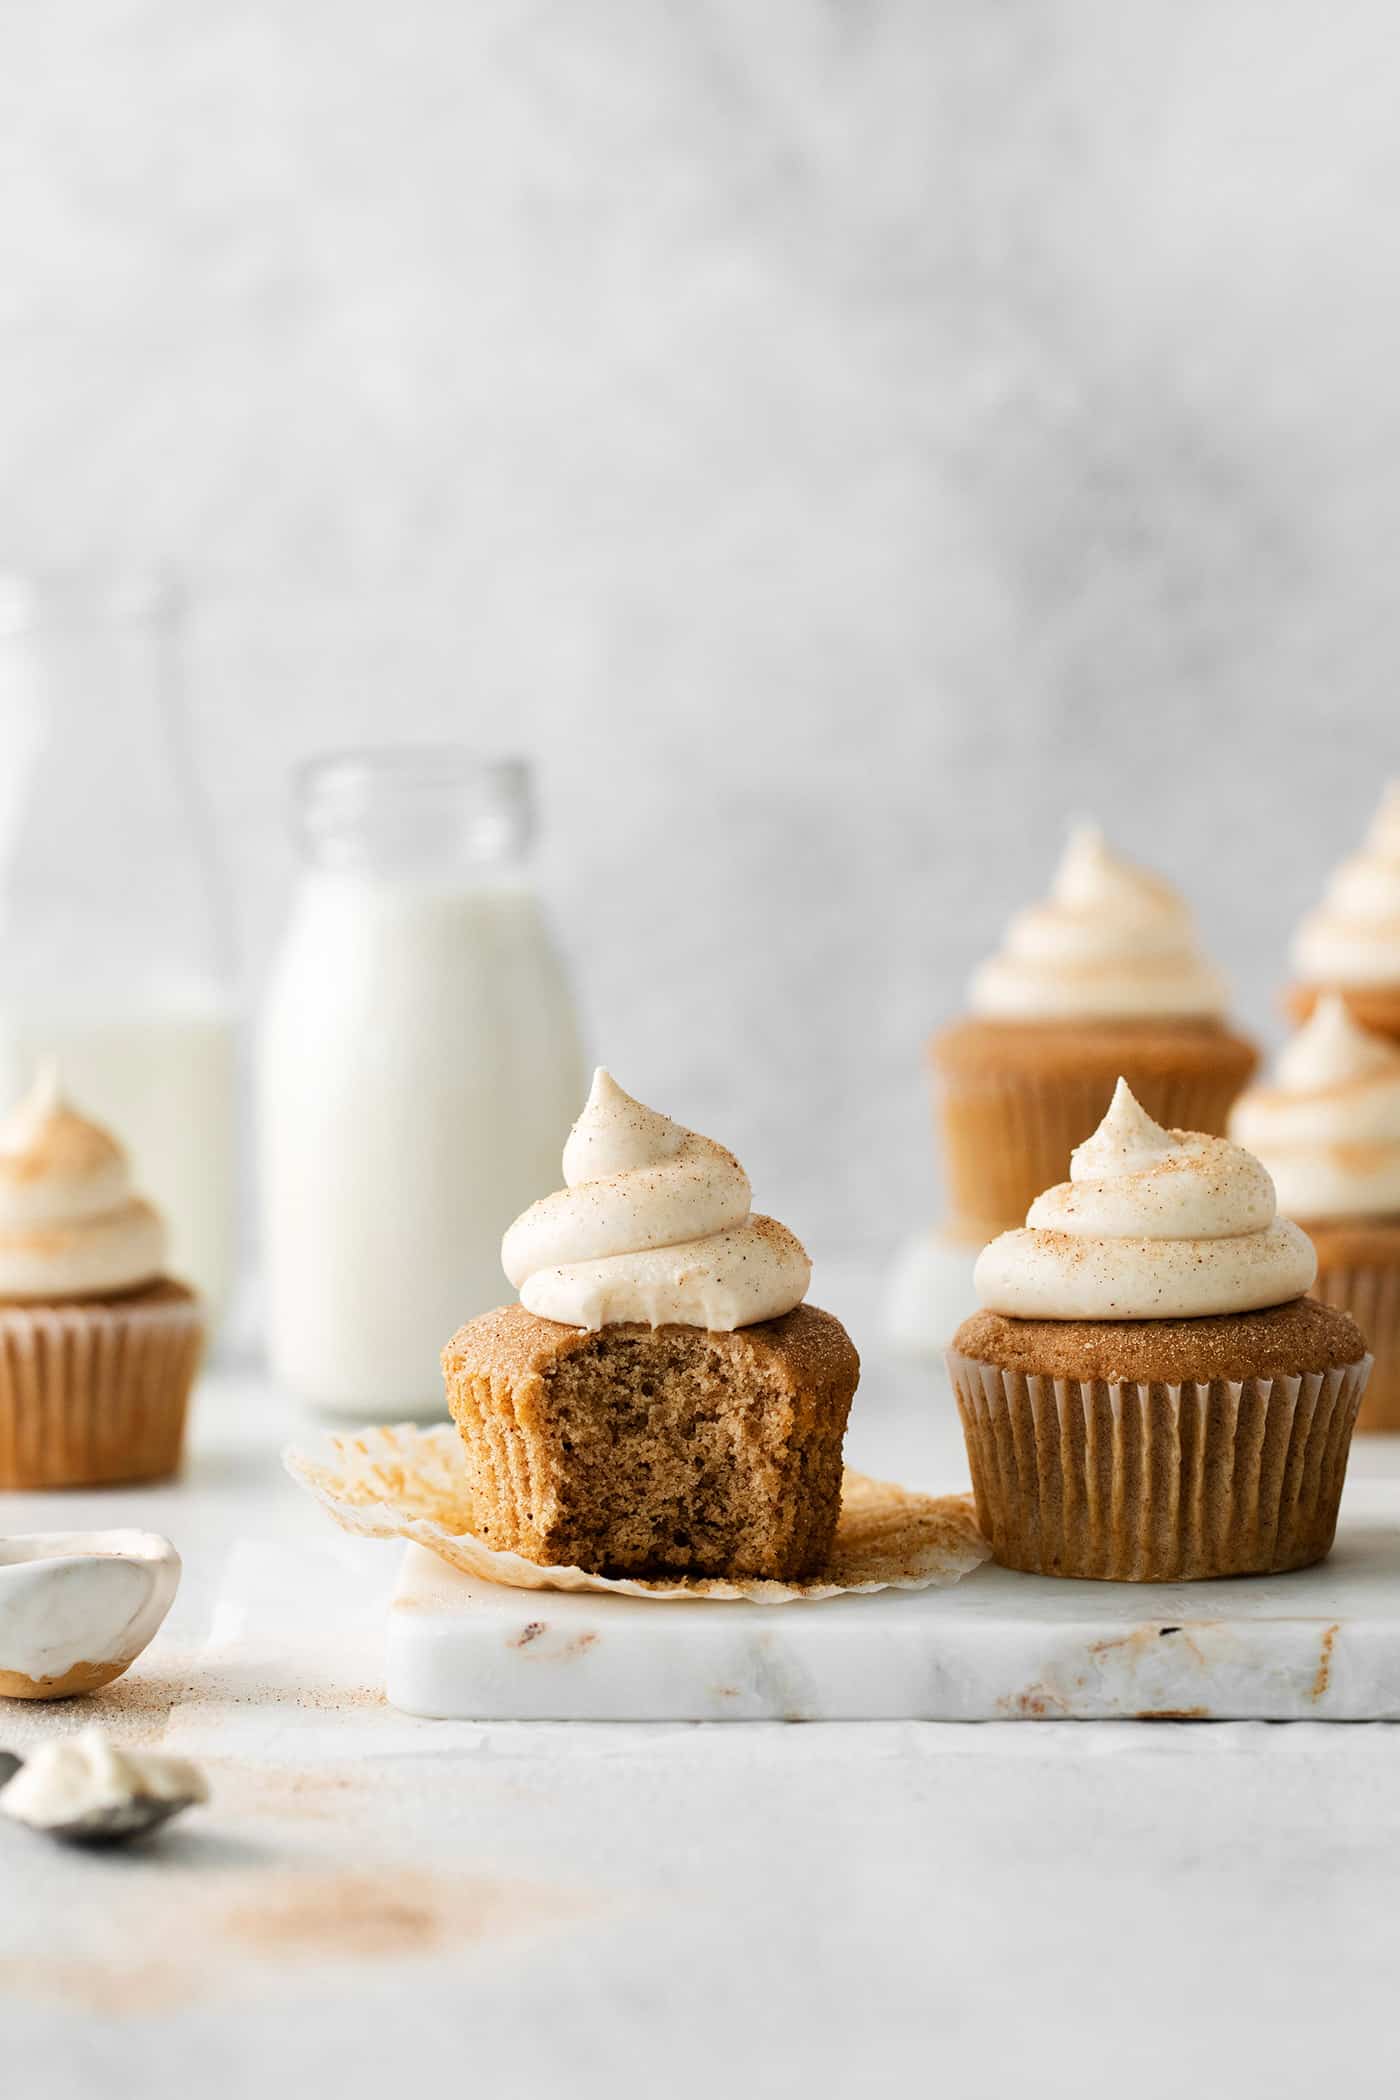 Snickerdoodle cupcakes with cream cheese frosting, one with a bite missing